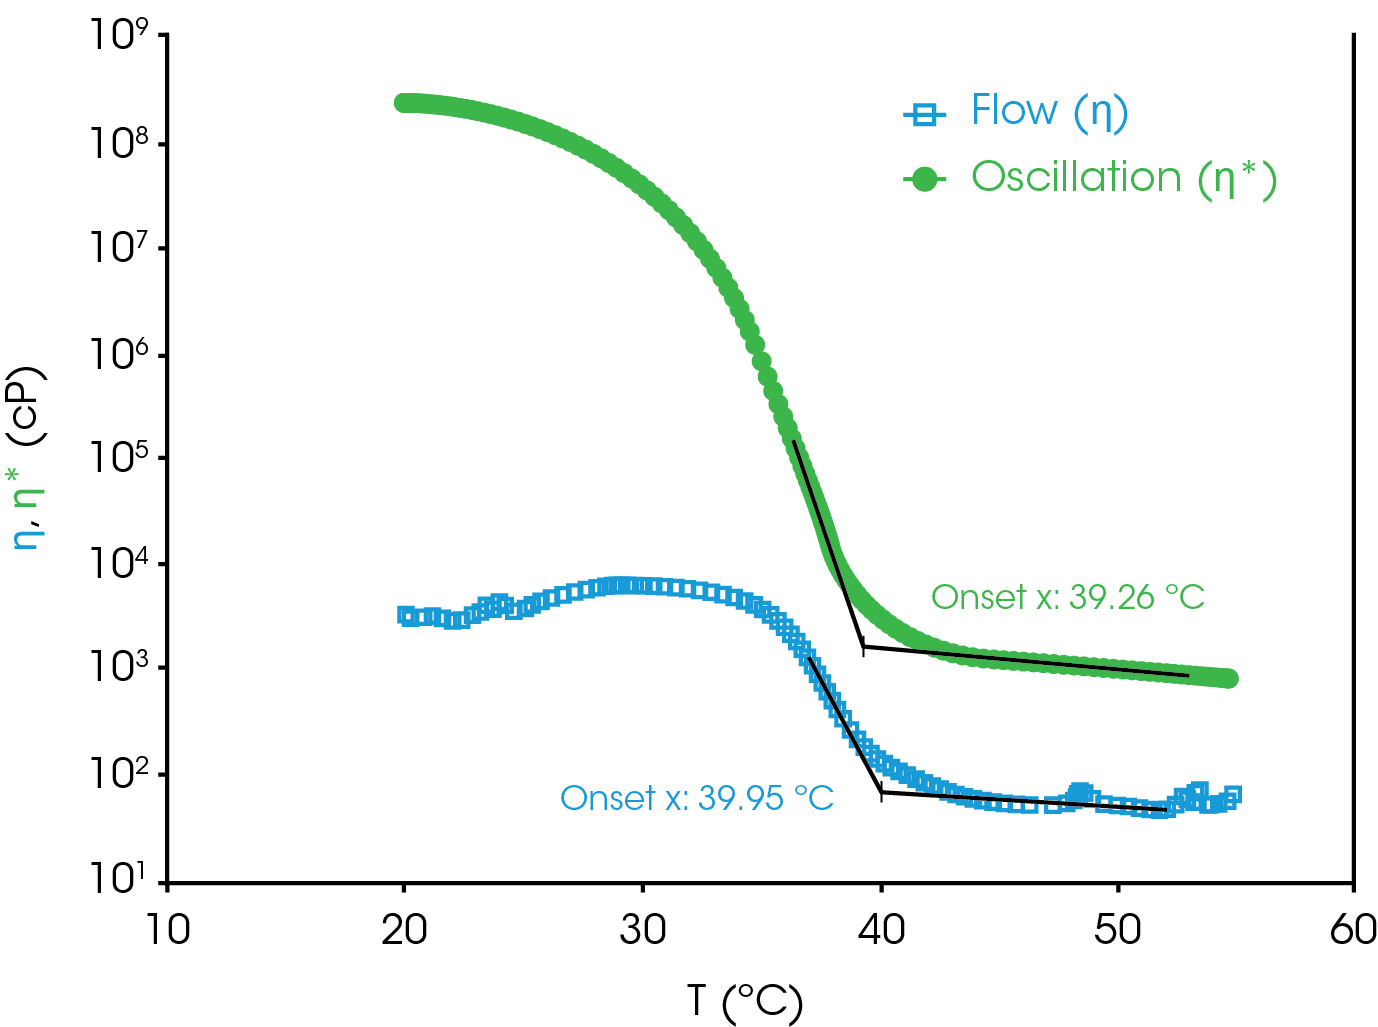 Figure 1. Viscosity (η) and complex viscosity (η*) vs temperature heavy crude oil. The blue curve represents η measured at a γ̇ of 10 s-1. The green curve represents η* measured under oscillation at ω = 6.283 rad/s. The cooling rate is 2 °C/min for both curves. Geometry: Parallel plate (40 mm aluminum)